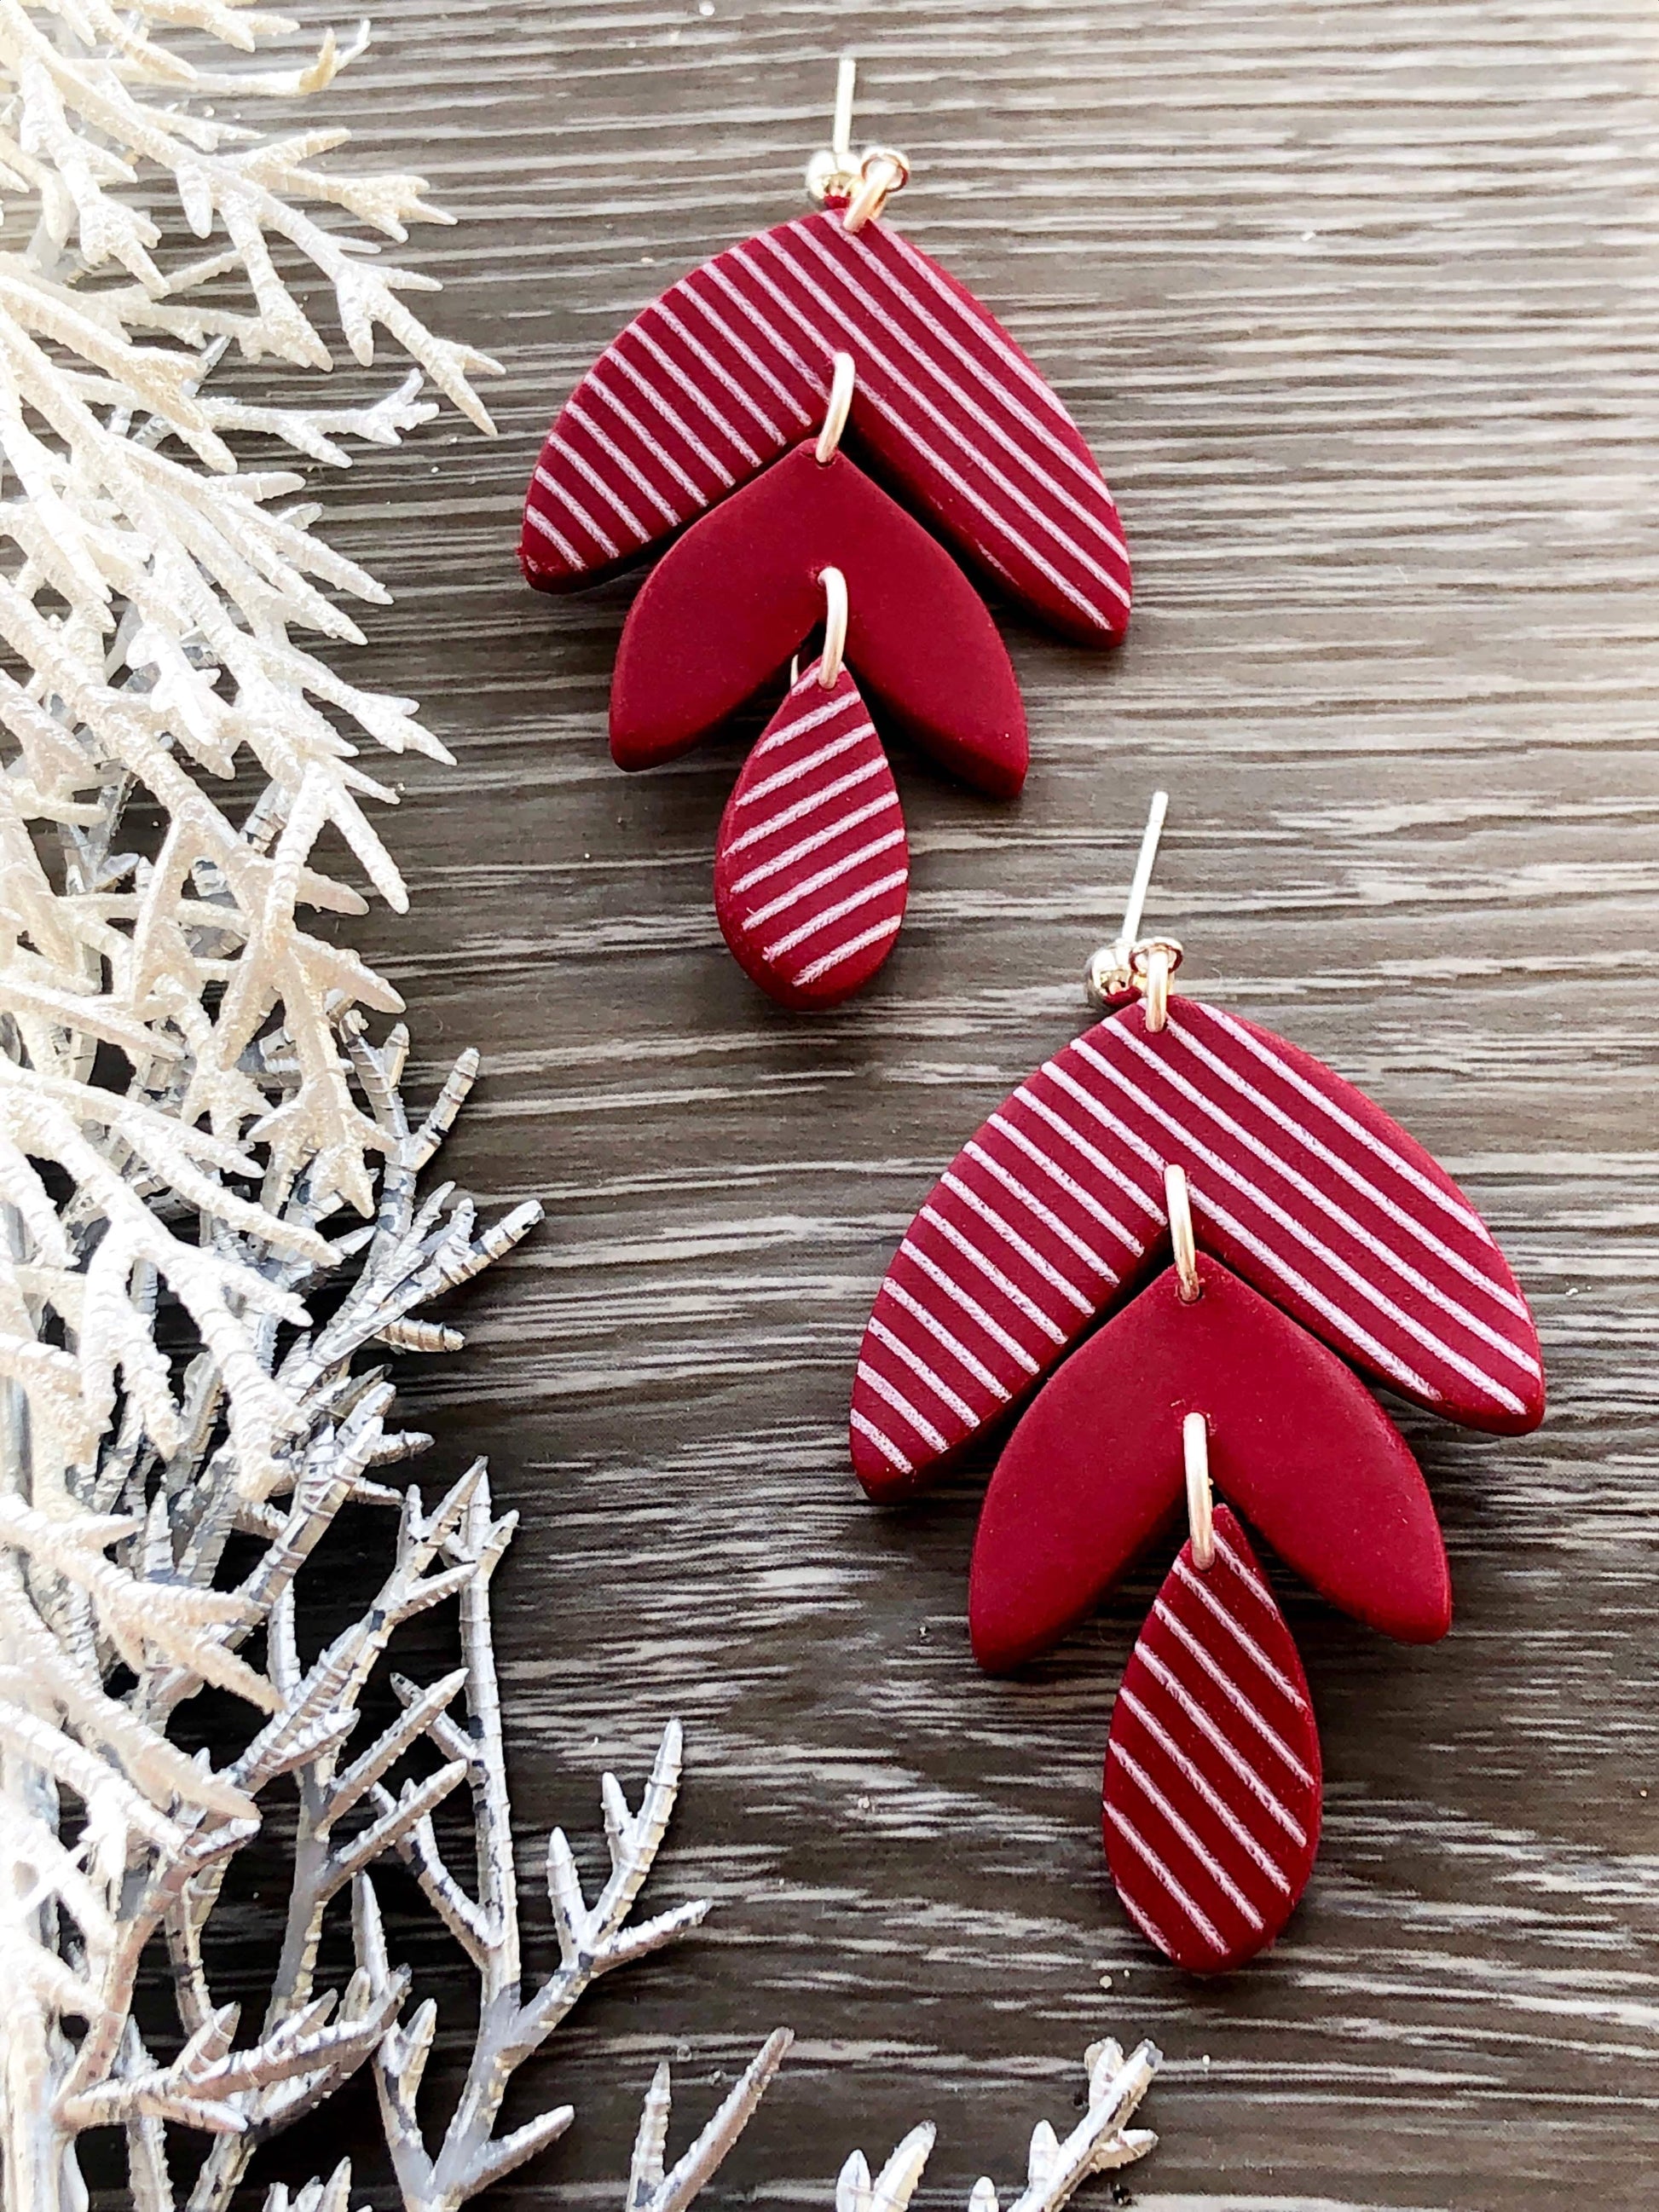 CANDI, Red & White Stripped Earrings, Polymer Clay Earrings, Christmas